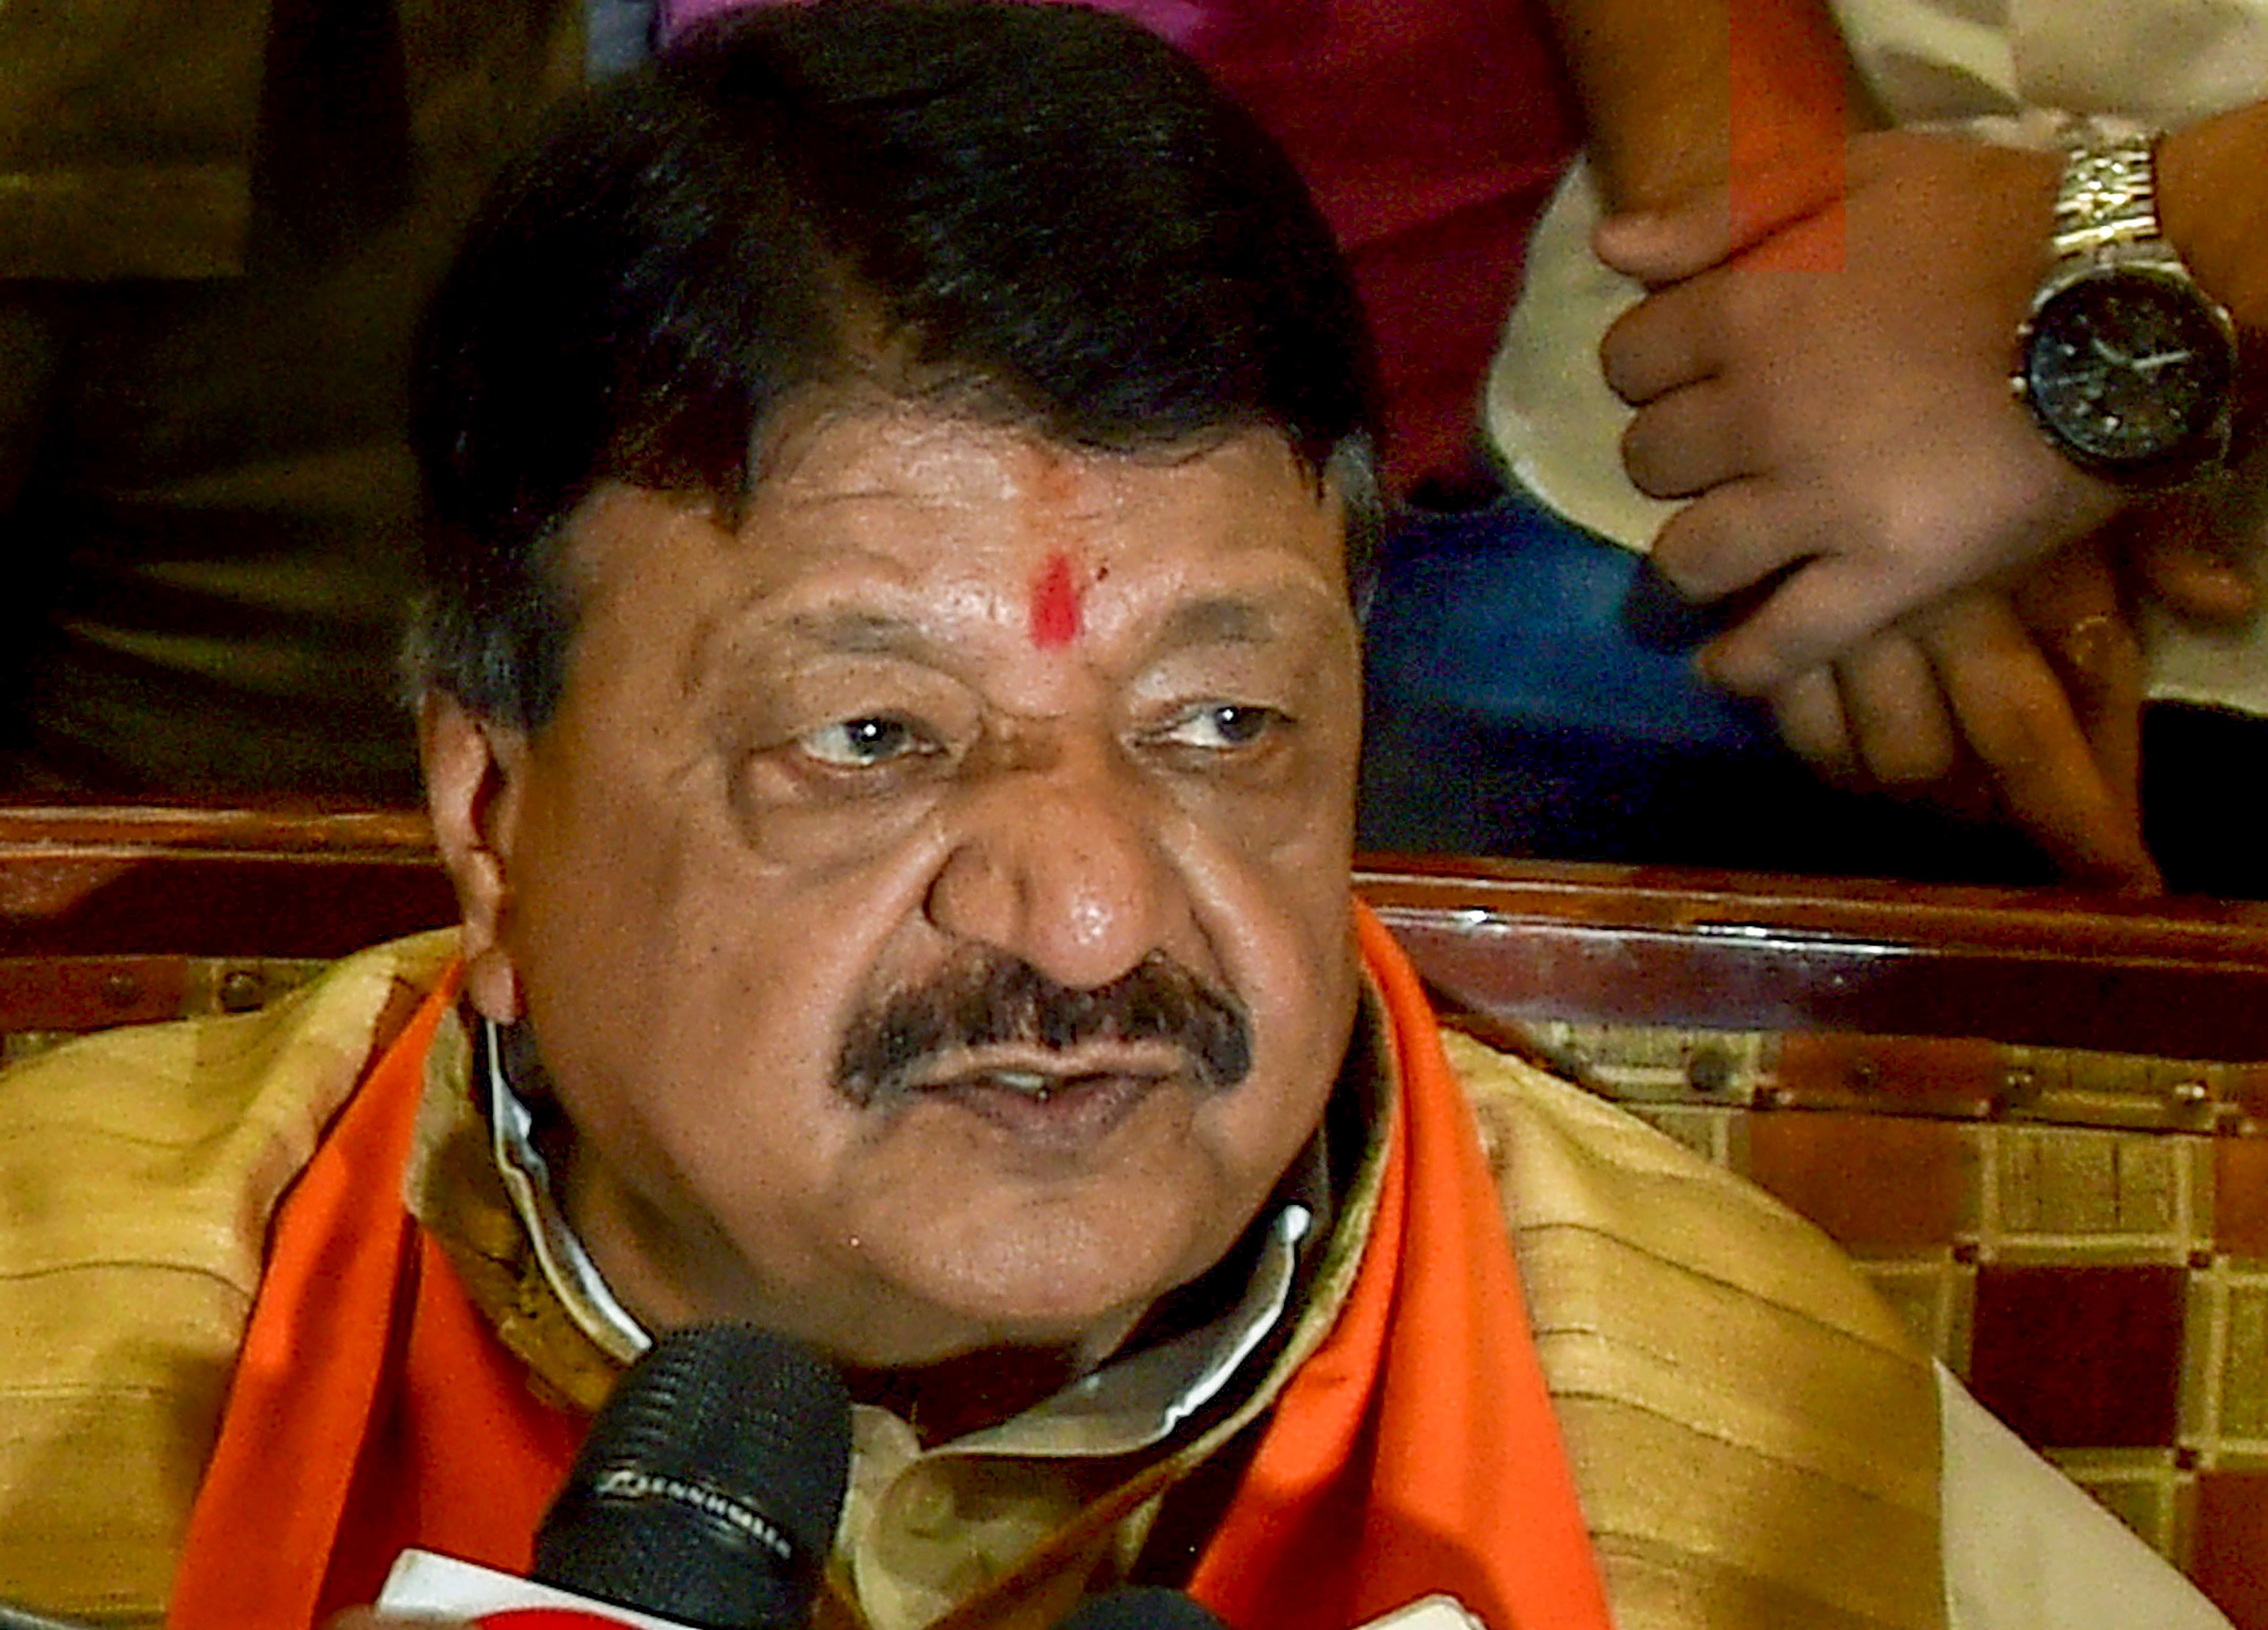 BJP National General Secretary Kailash Vijayvargiya talks to the media after Calcutta High Court refused permission to BJP for Amit Shah's Save Democracy Rath Yatra launch rally, at a hotel in Cooch Behar. (PTI Photo)